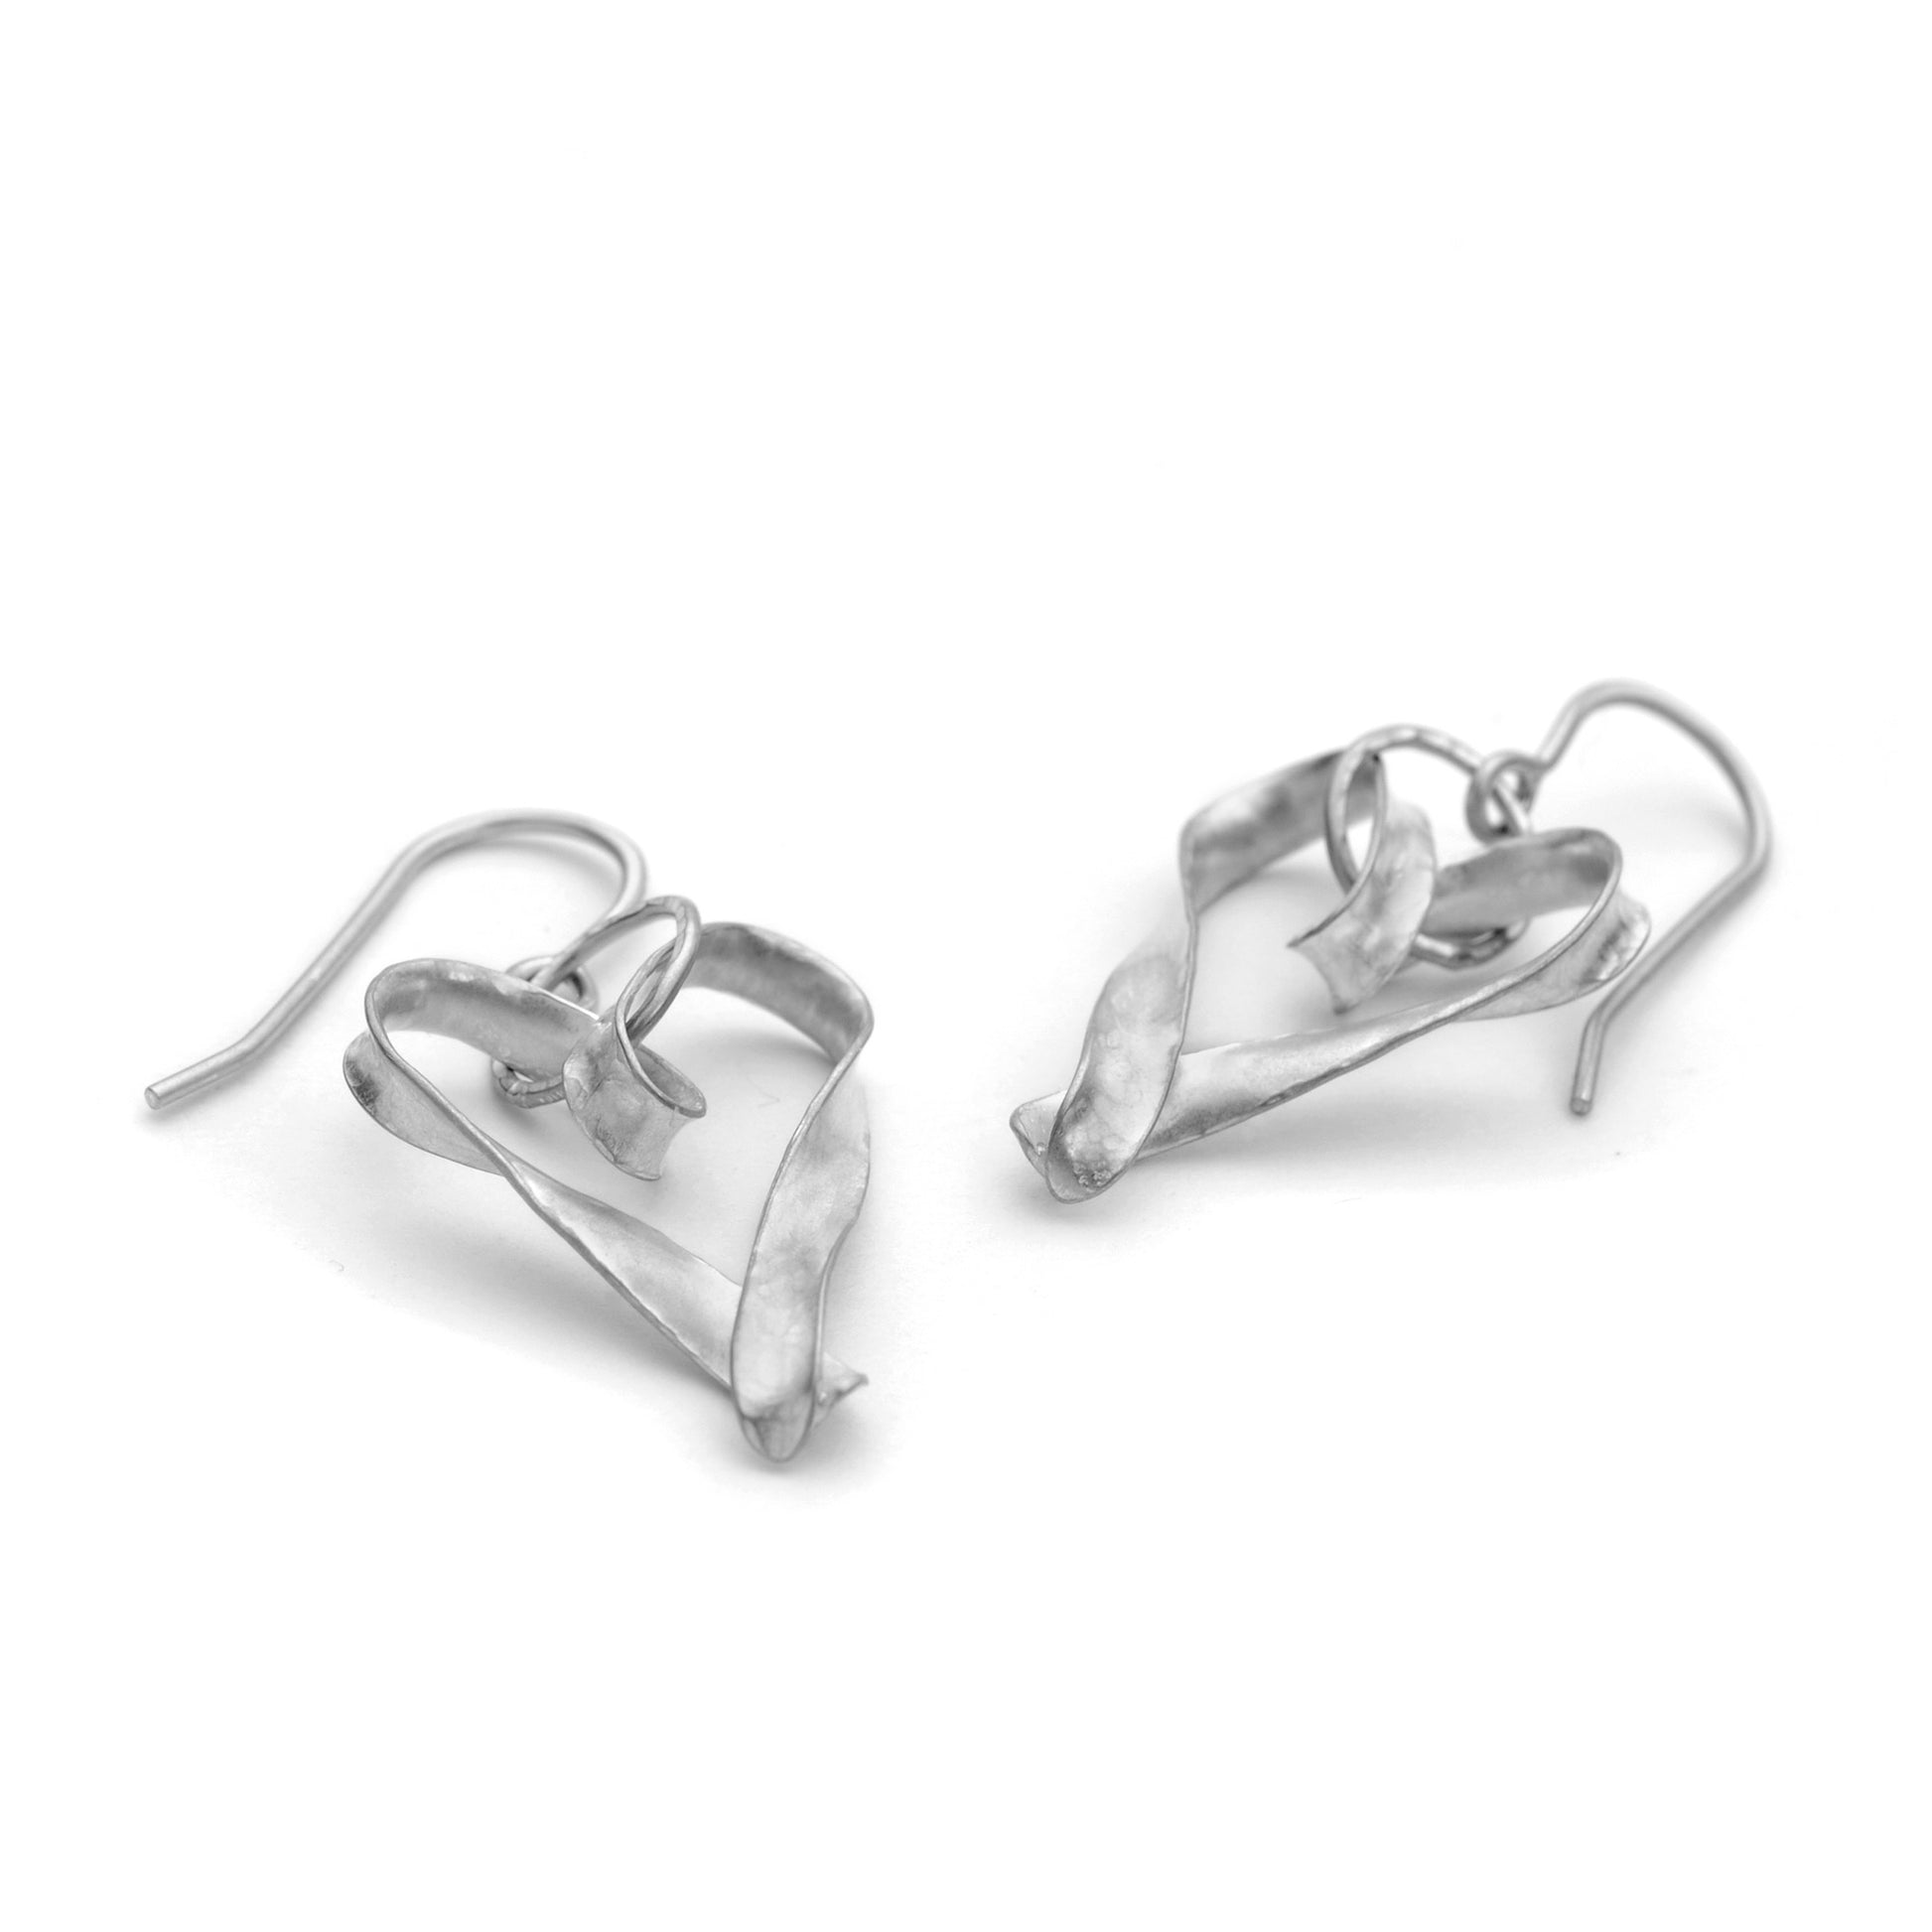 A pair of silver heart drop earrings, each formed from a single metal of silver, curled, twisted and joined at the pointed end. They are attached to the ear wire by a large, hammer textured jump ring. They are seen here lying on a surface and viewed at a low angle from the pointed end.